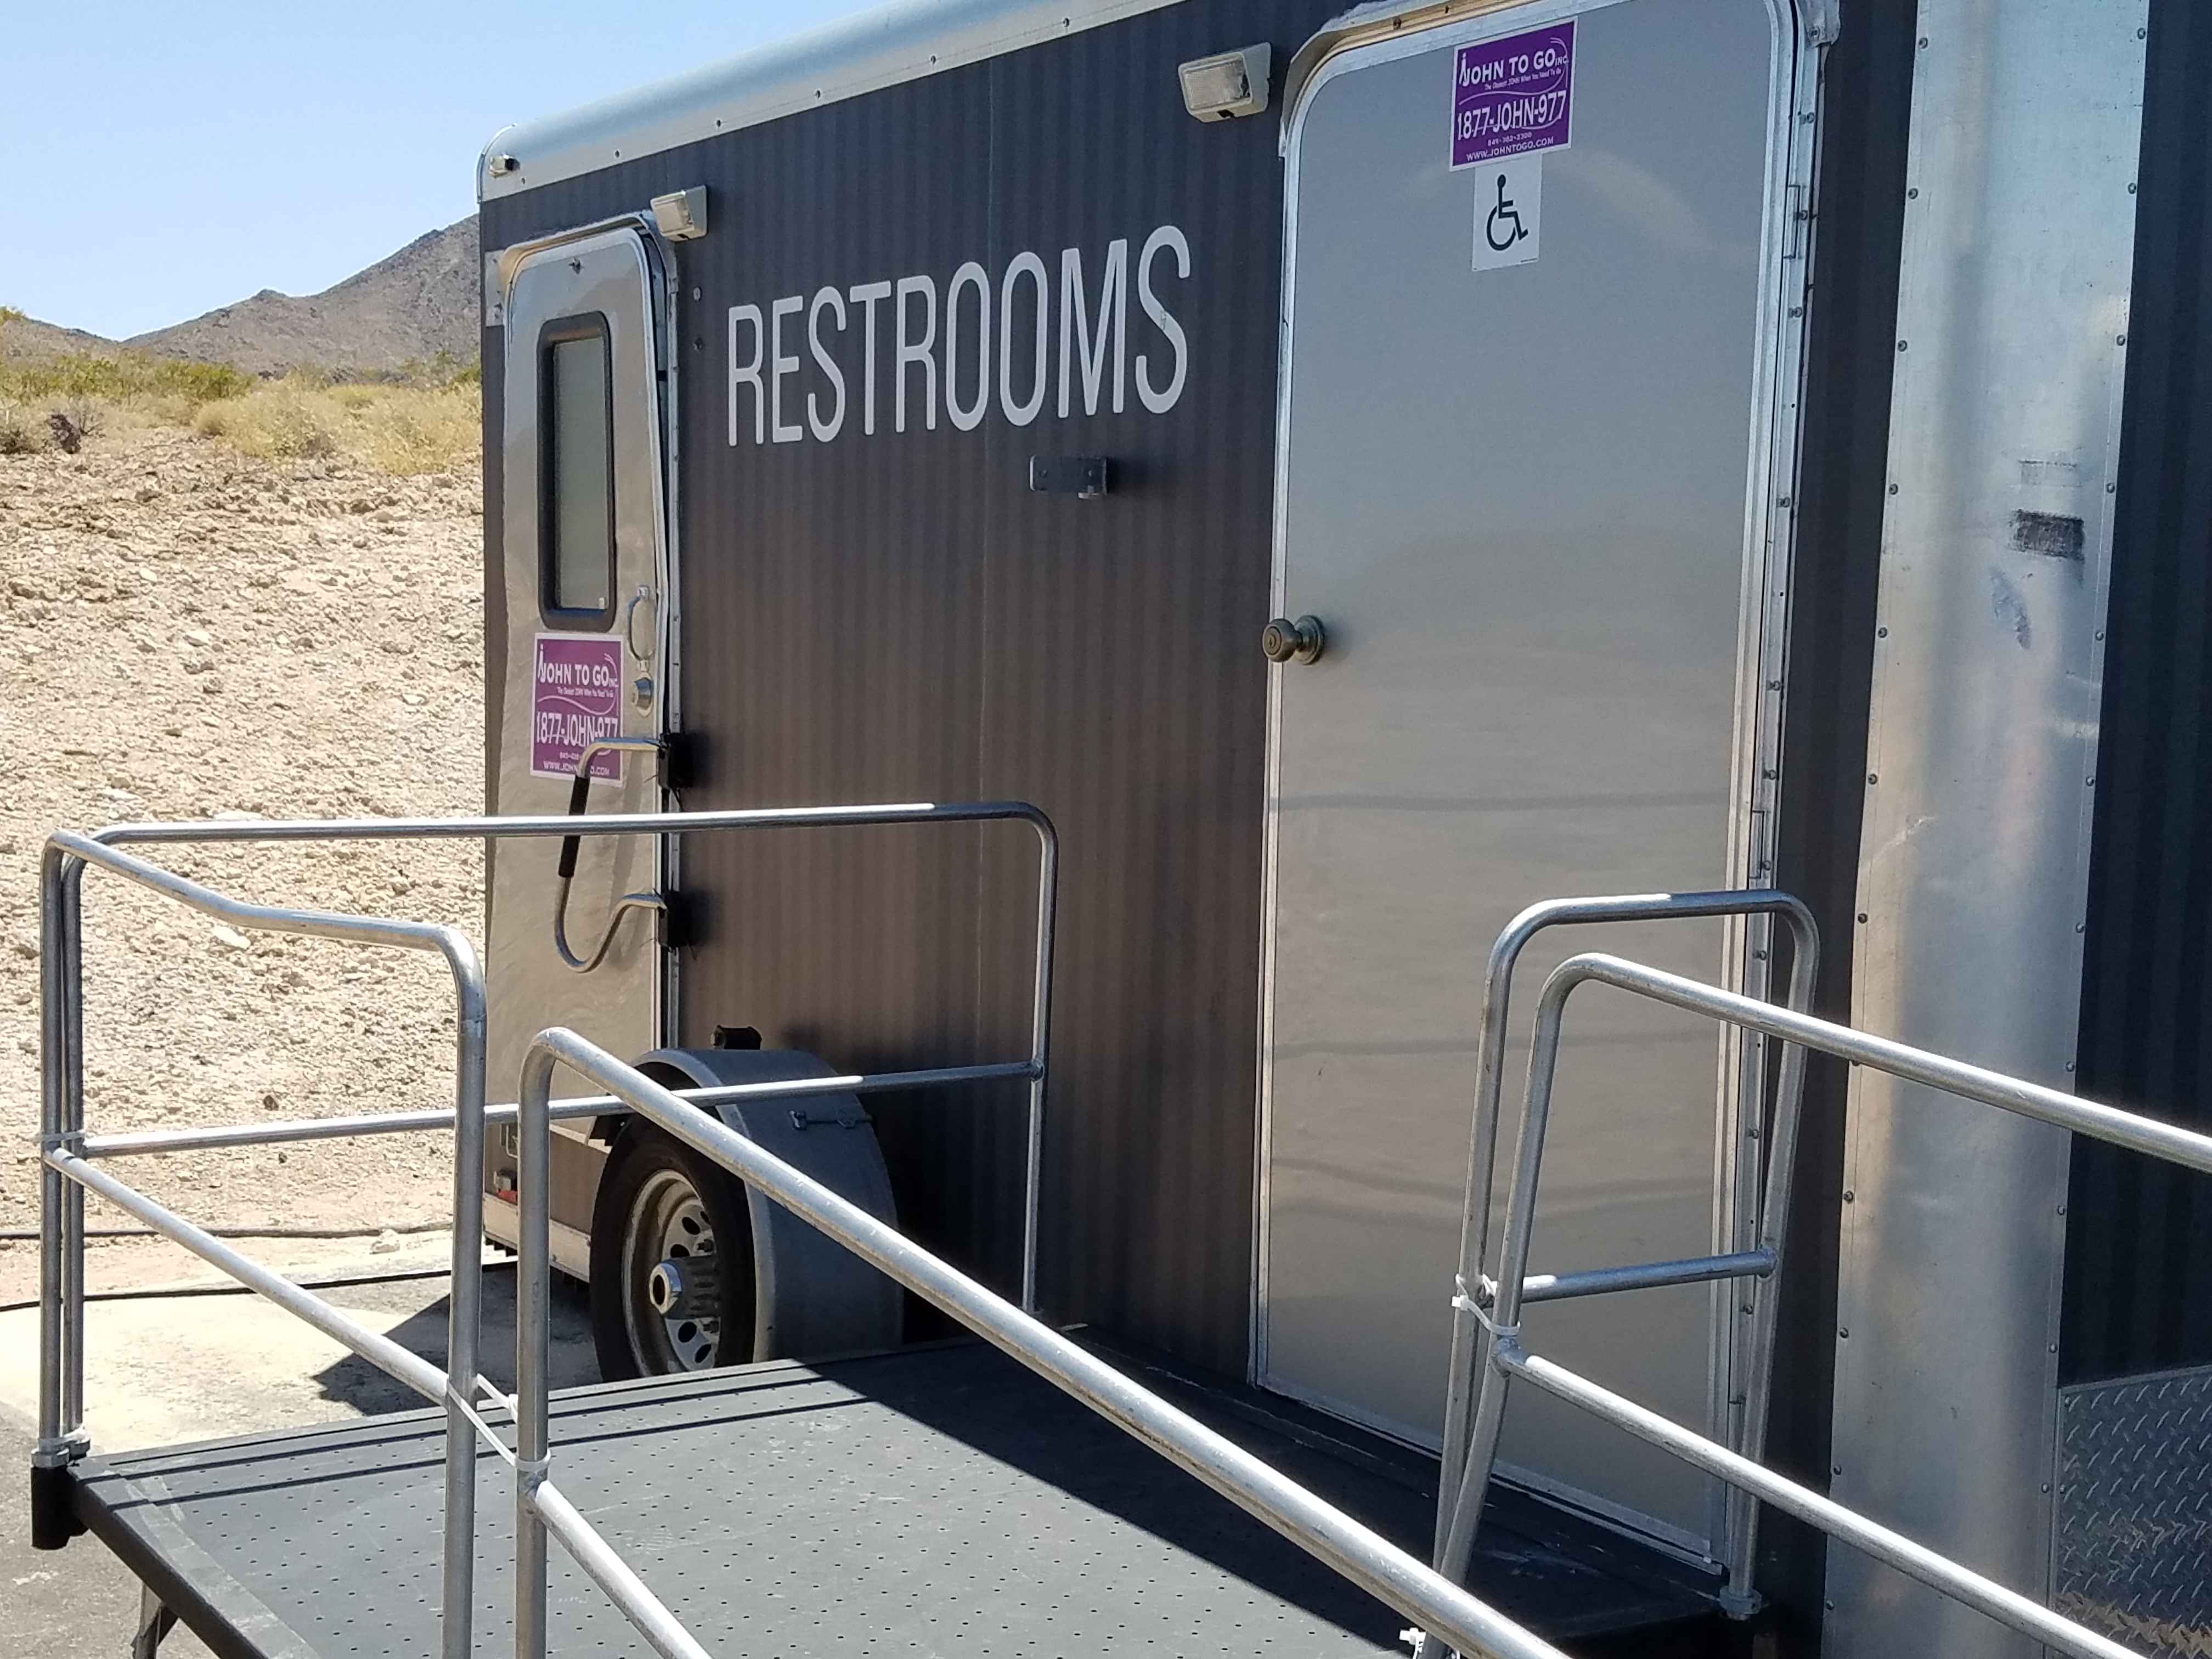 ADA Plus Two Station Vegas Restroom Trailer, at the Sloan National Park, in Las Vegas Nevada 